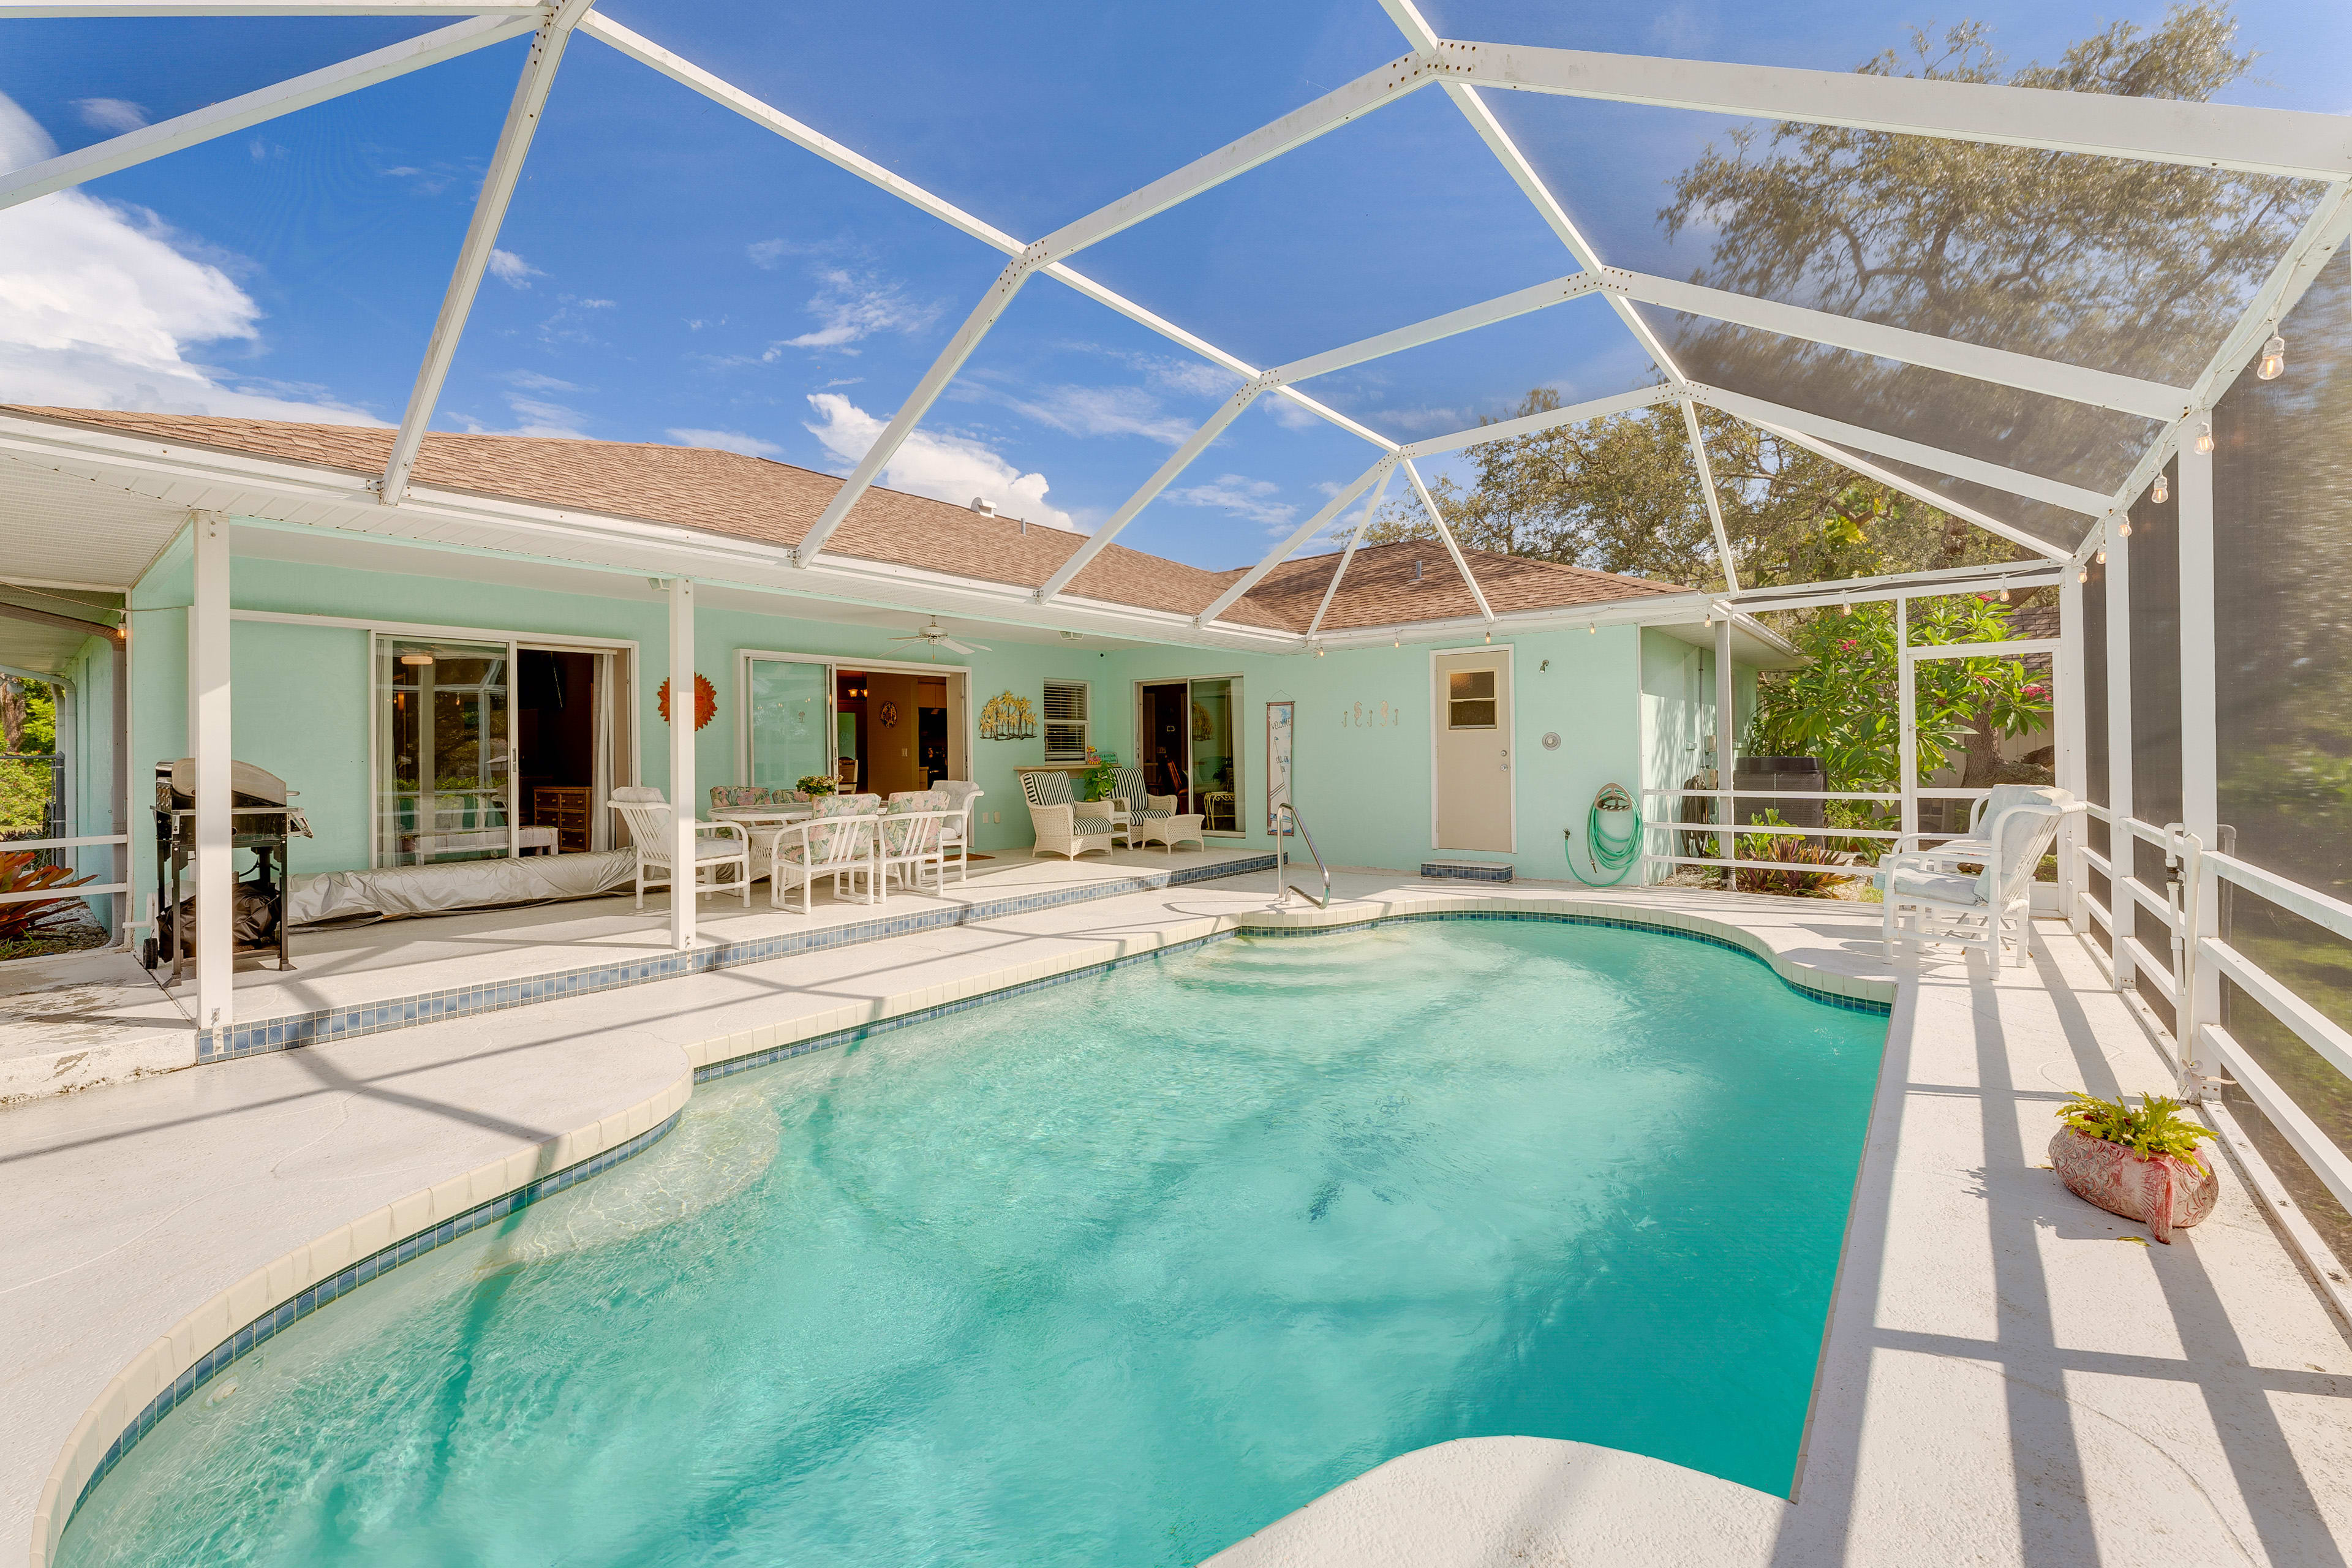 Private Lanai | Outdoor Pool (Open Year-Round, Unheated, Depth 3'-9')